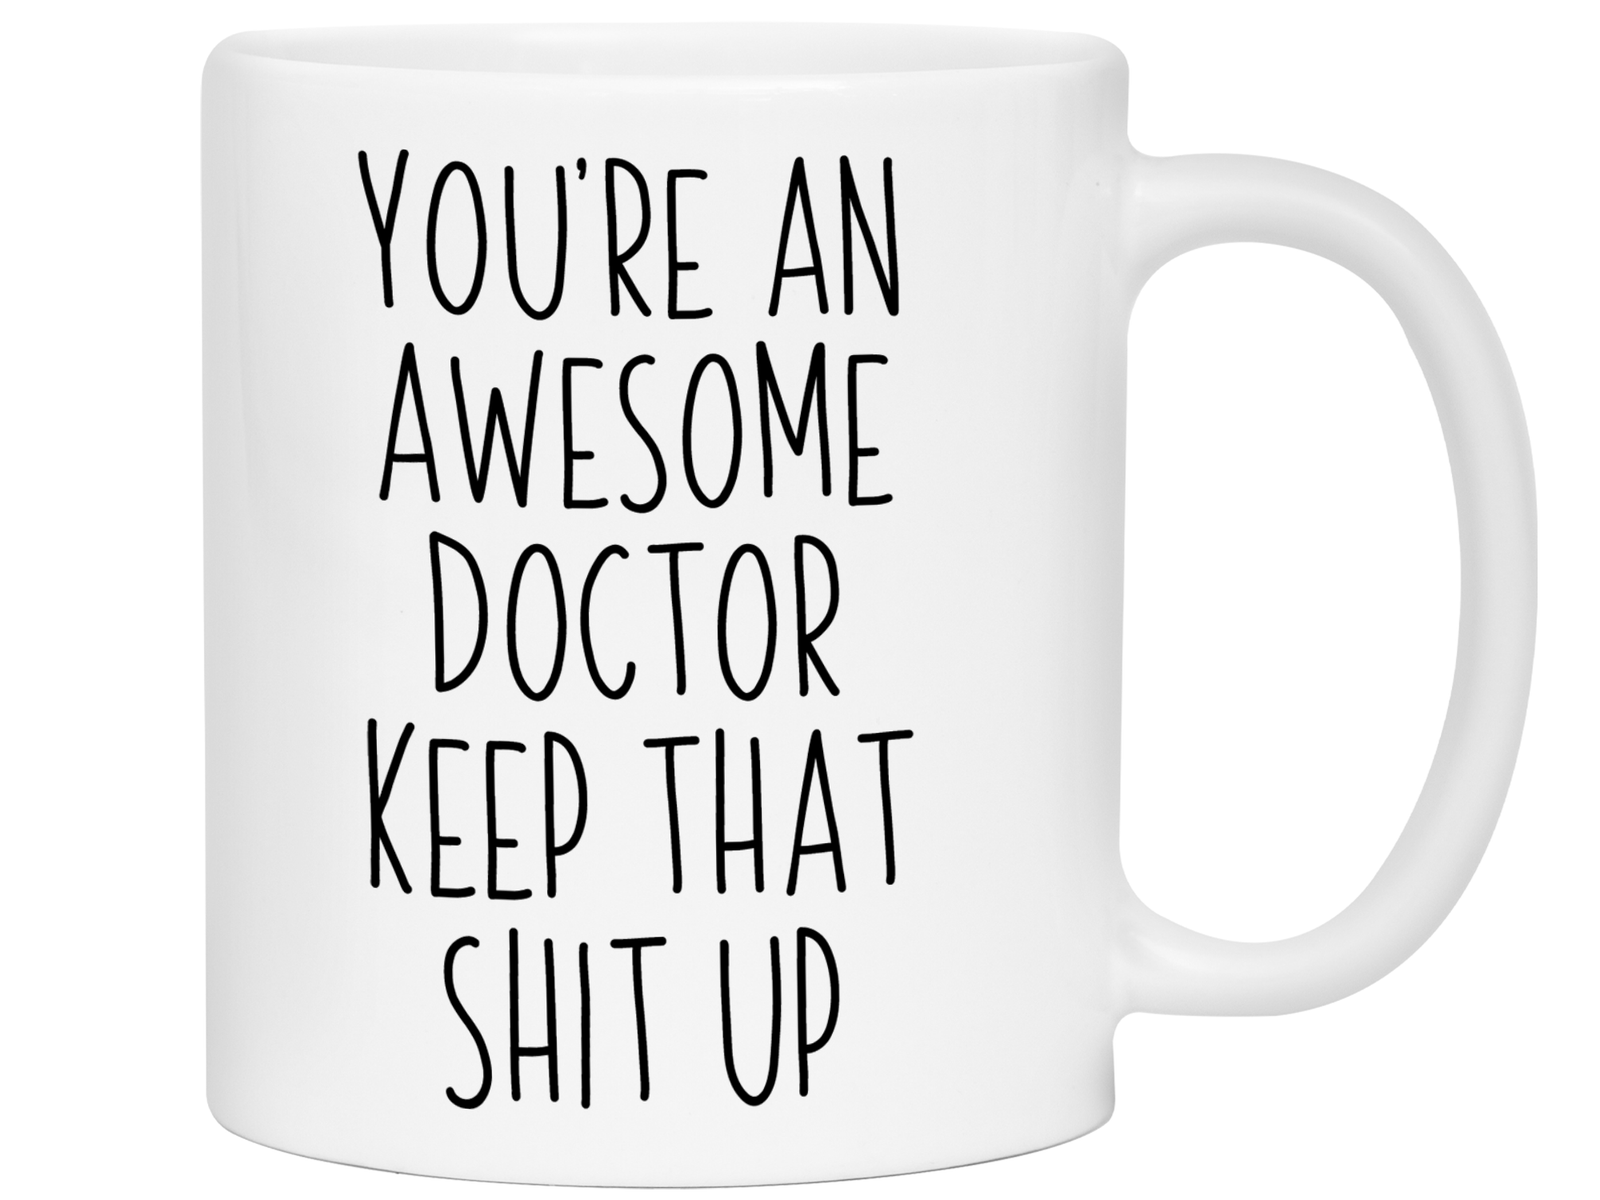 Funny Golf gifts The Doctor Says It's Incurable' Full Color Mug